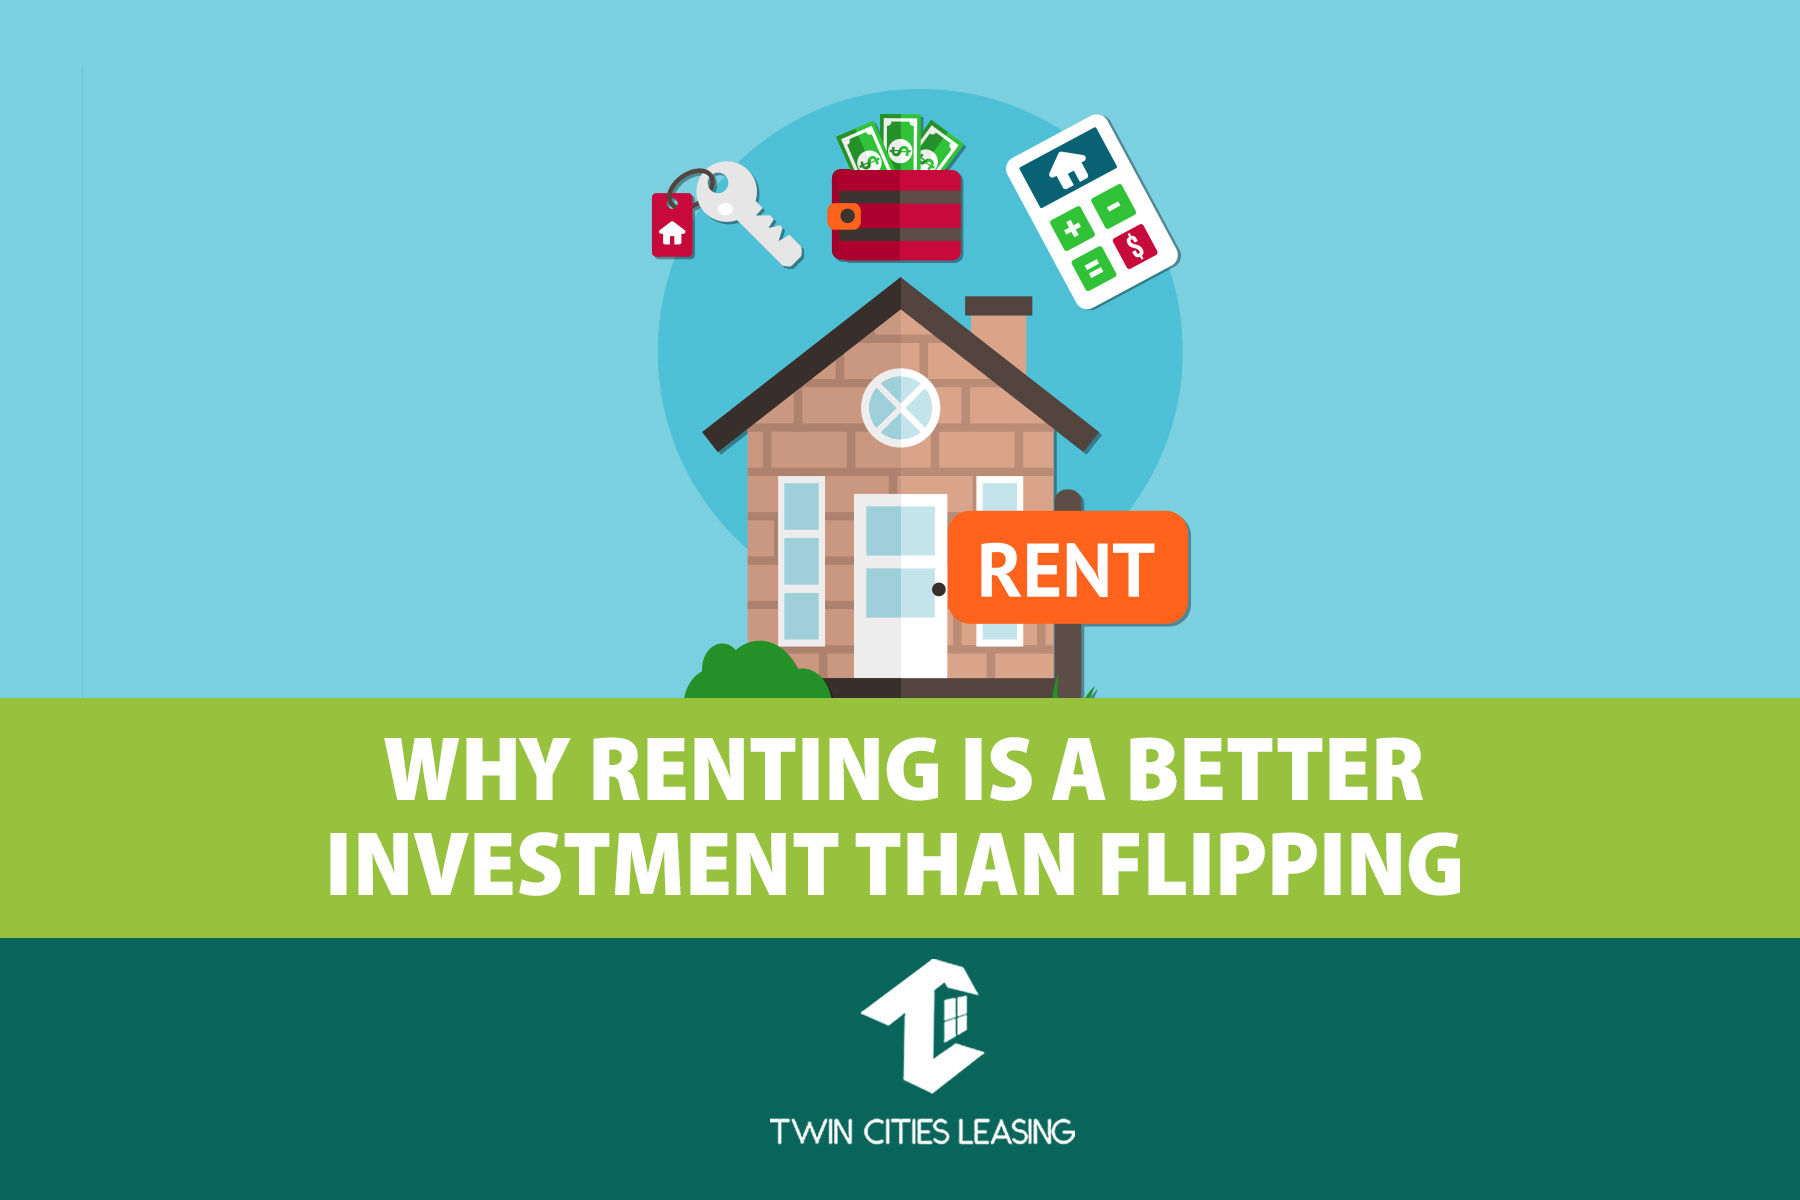 Why Renting Your Property Is a Better Investment Than Flipping It